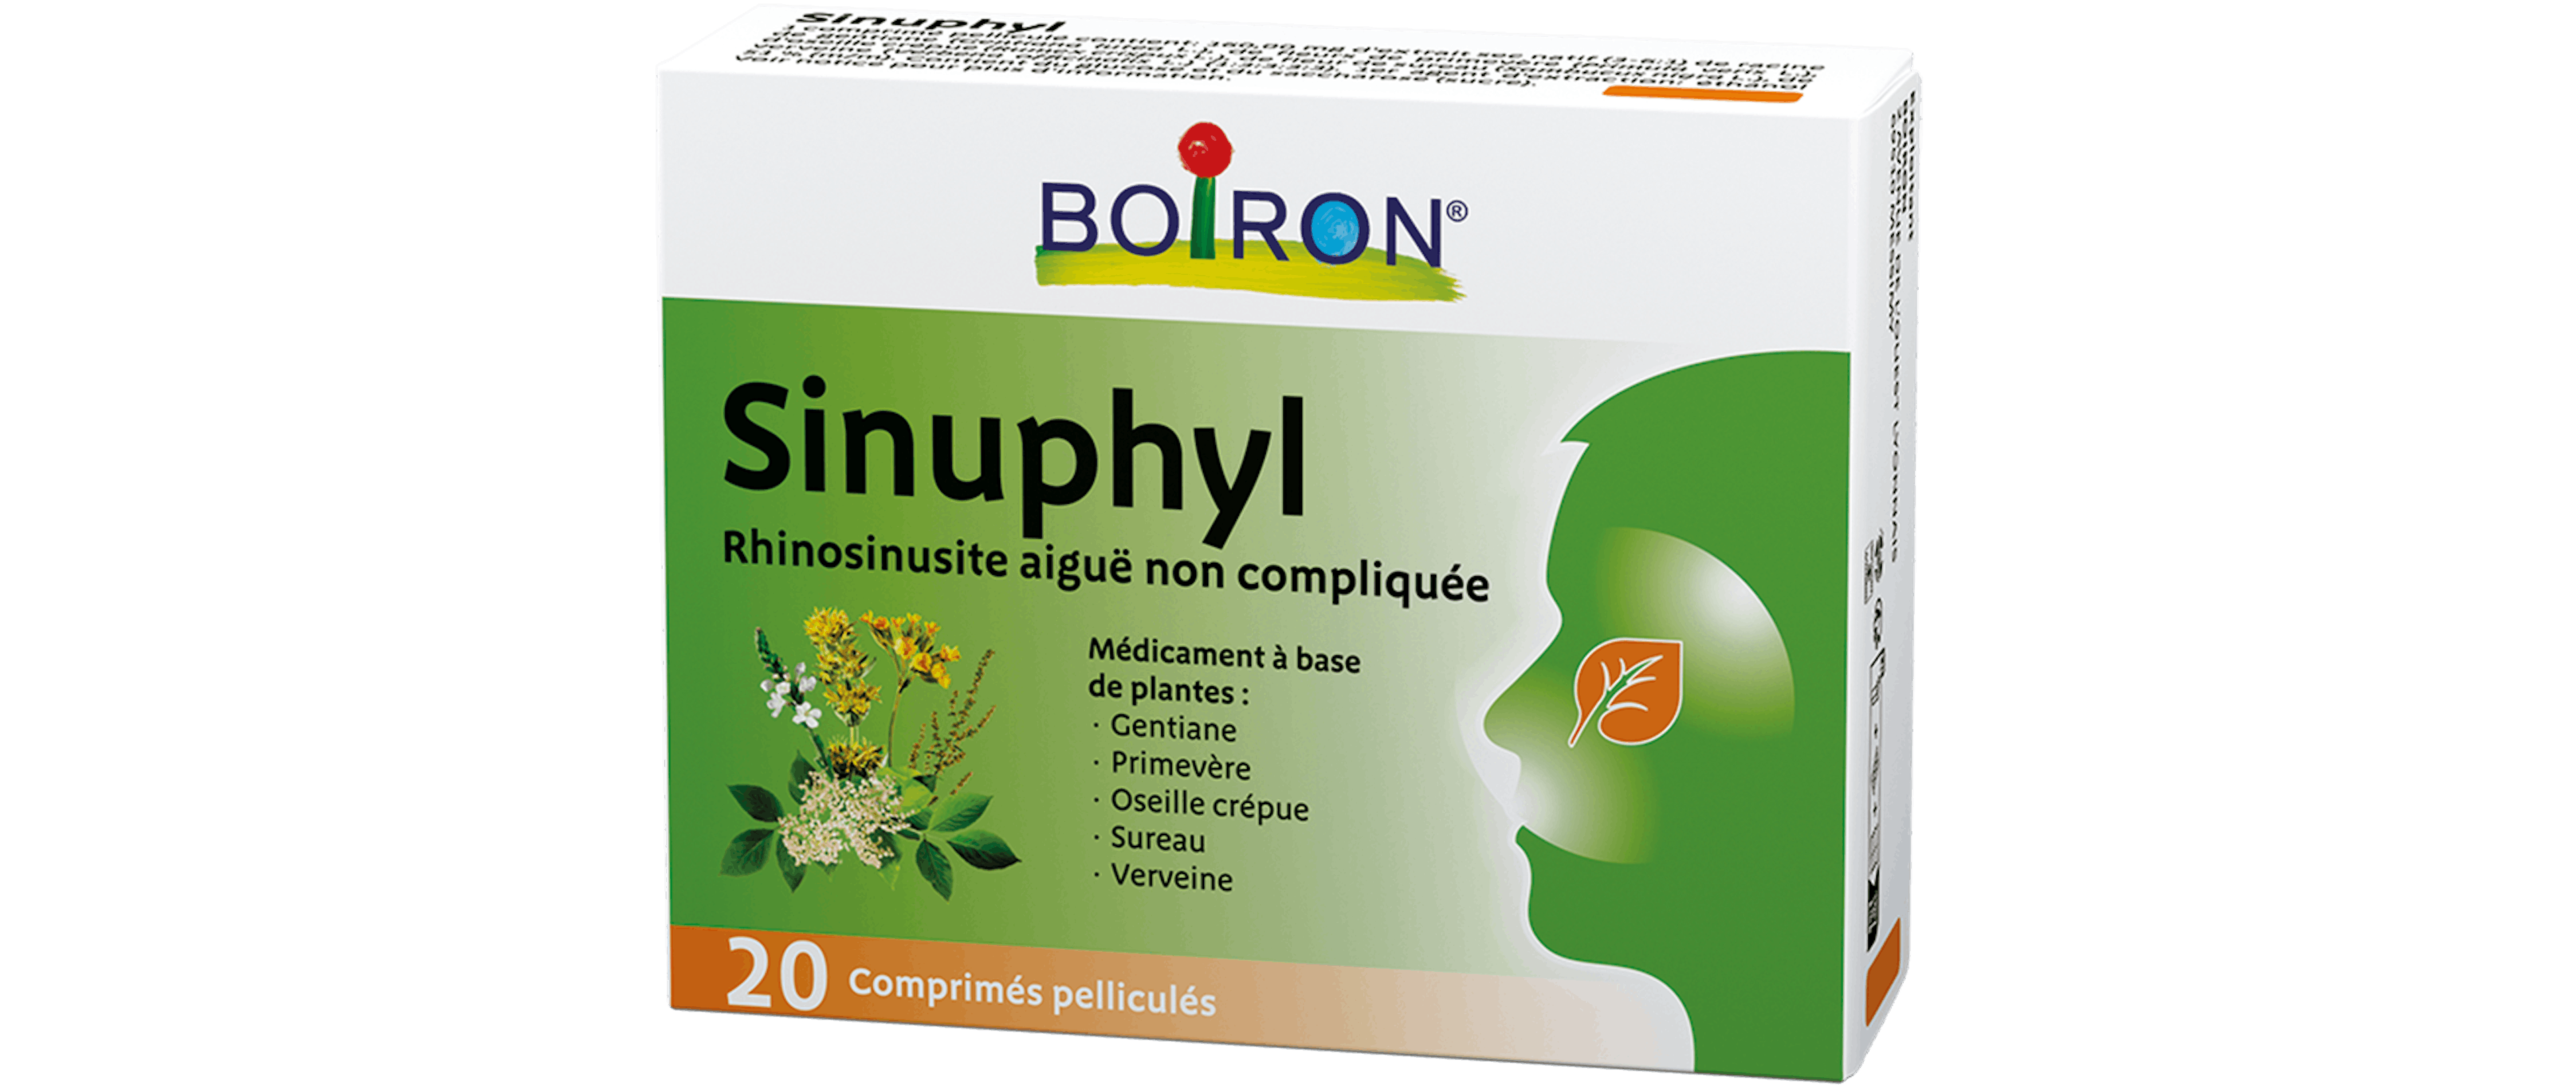 pack sinuphyl